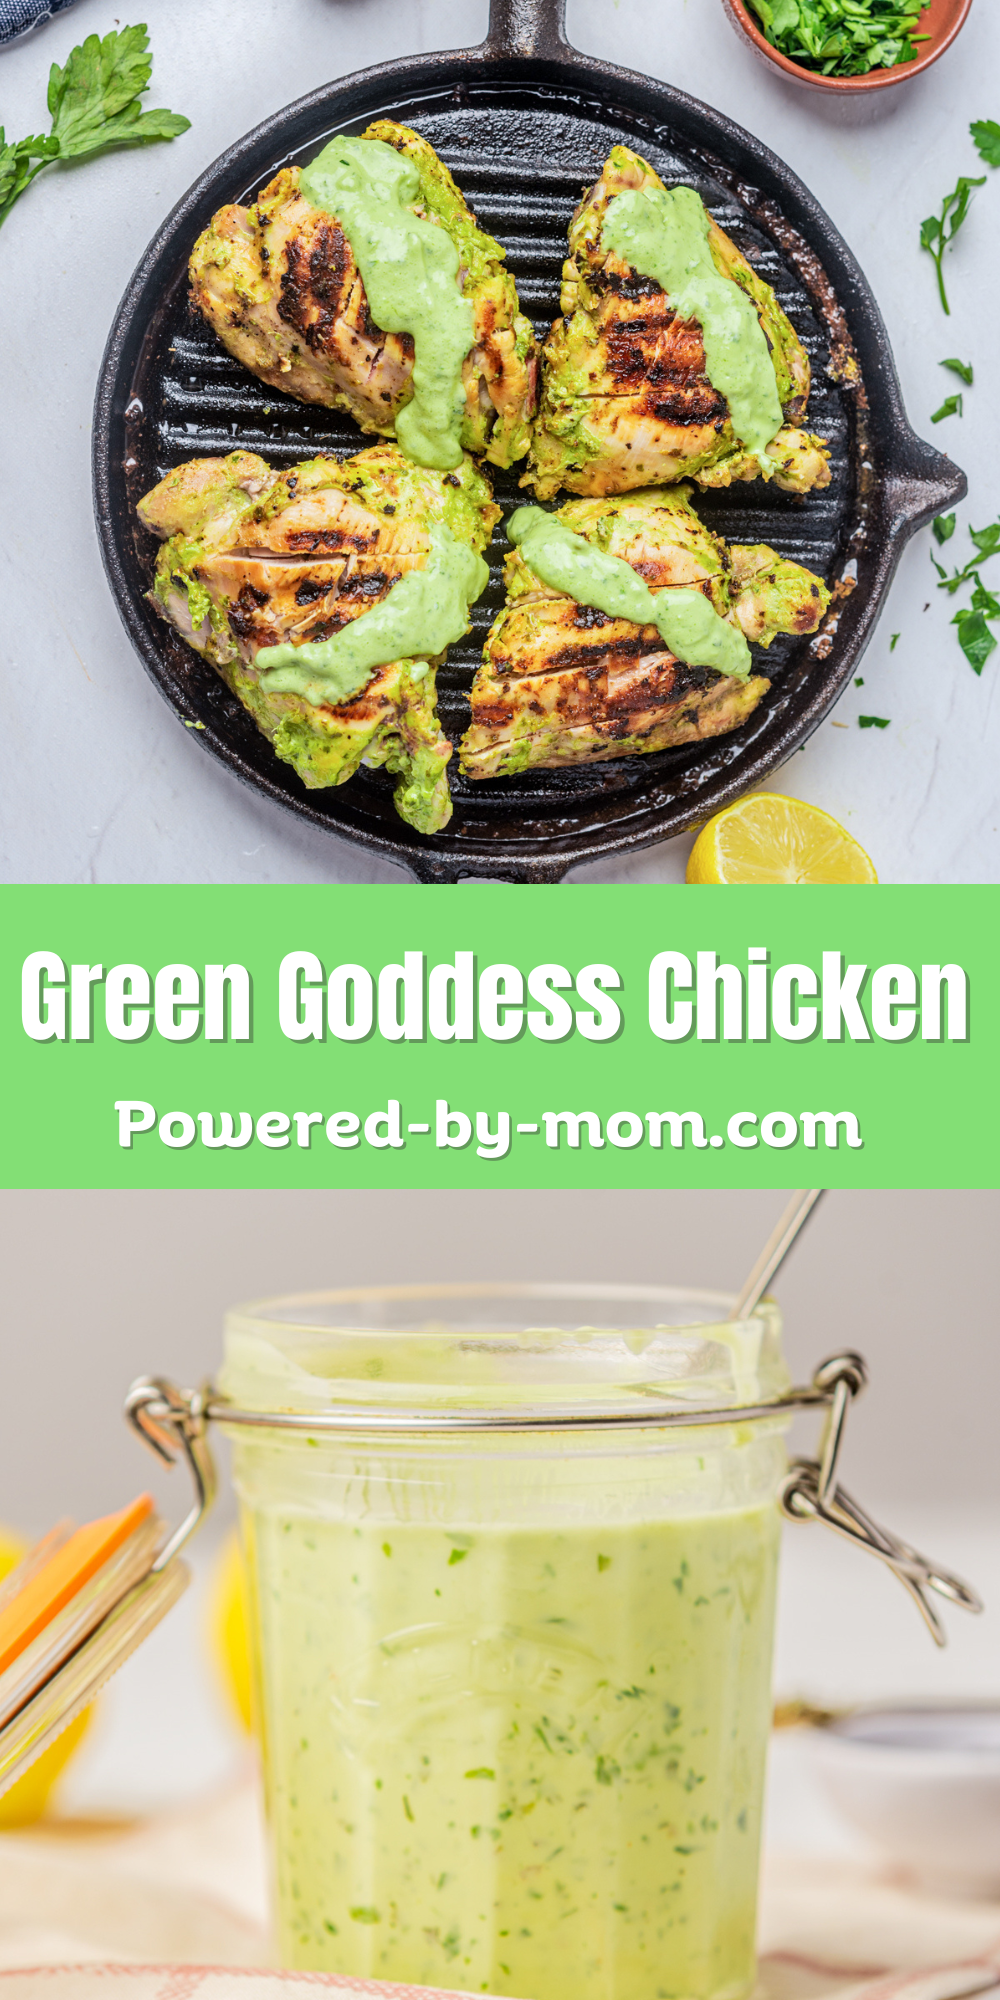 Packed with flavour, this Green Goddess Chicken recipe is quick and easy to make and the Green Goddess dressing takes this meal to the next level. The chicken is juicy and flavourful and dressing serves as the marinade but can also be your salad dressing, dip for veggies and so much more.  I'm showing you the chicken when it has been marinated with the Green Goddess dressing and when it hasn't and only has it as a dressing. It's up to you whether to use it as a marinade but it adds amazing flavour. Get the recip.